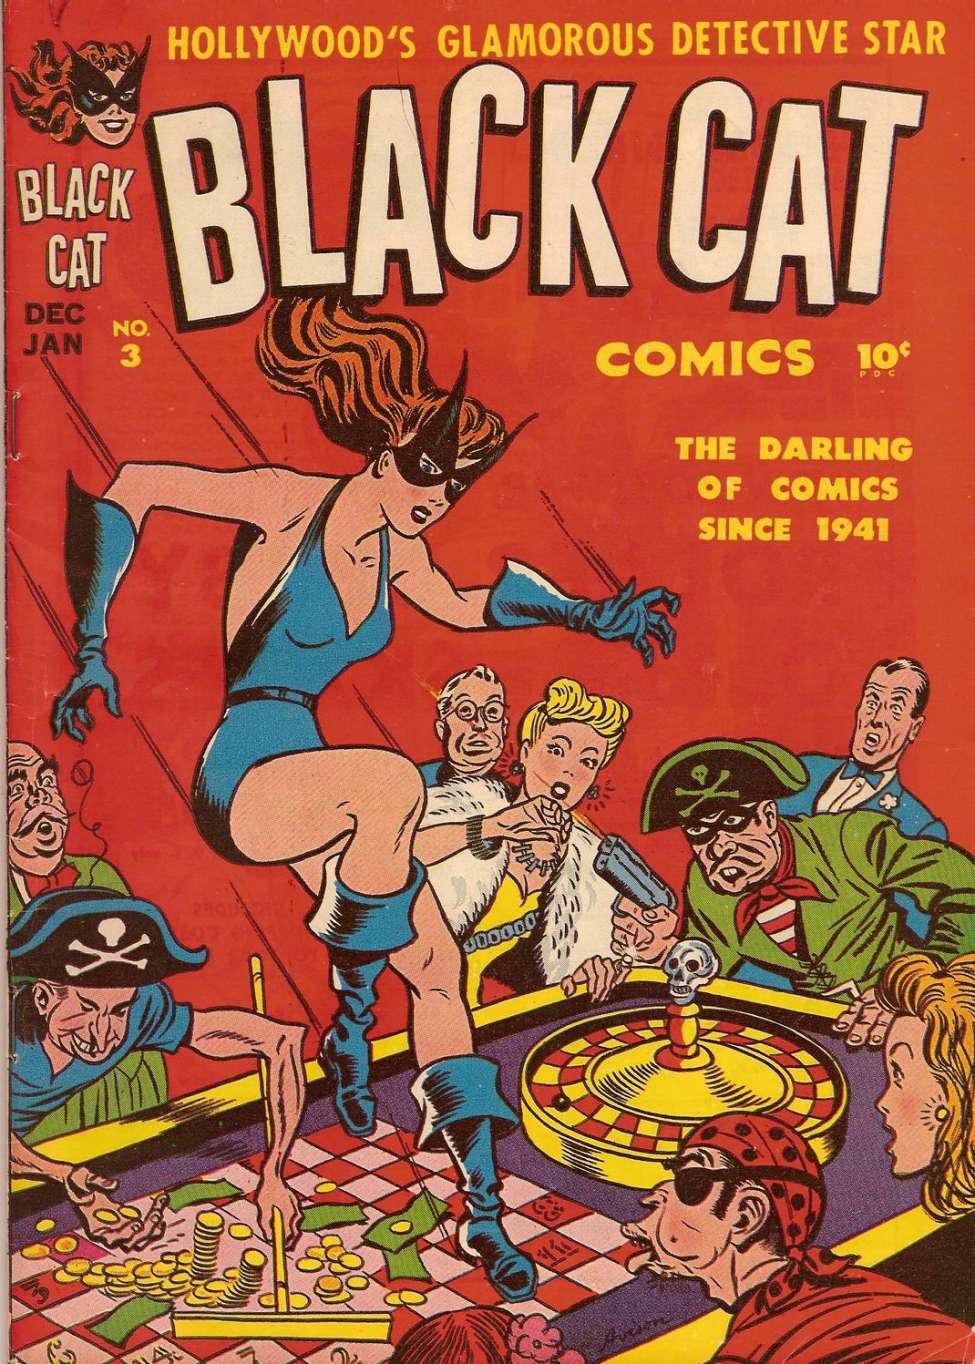 Book Cover For Black Cat 3 - Version 1